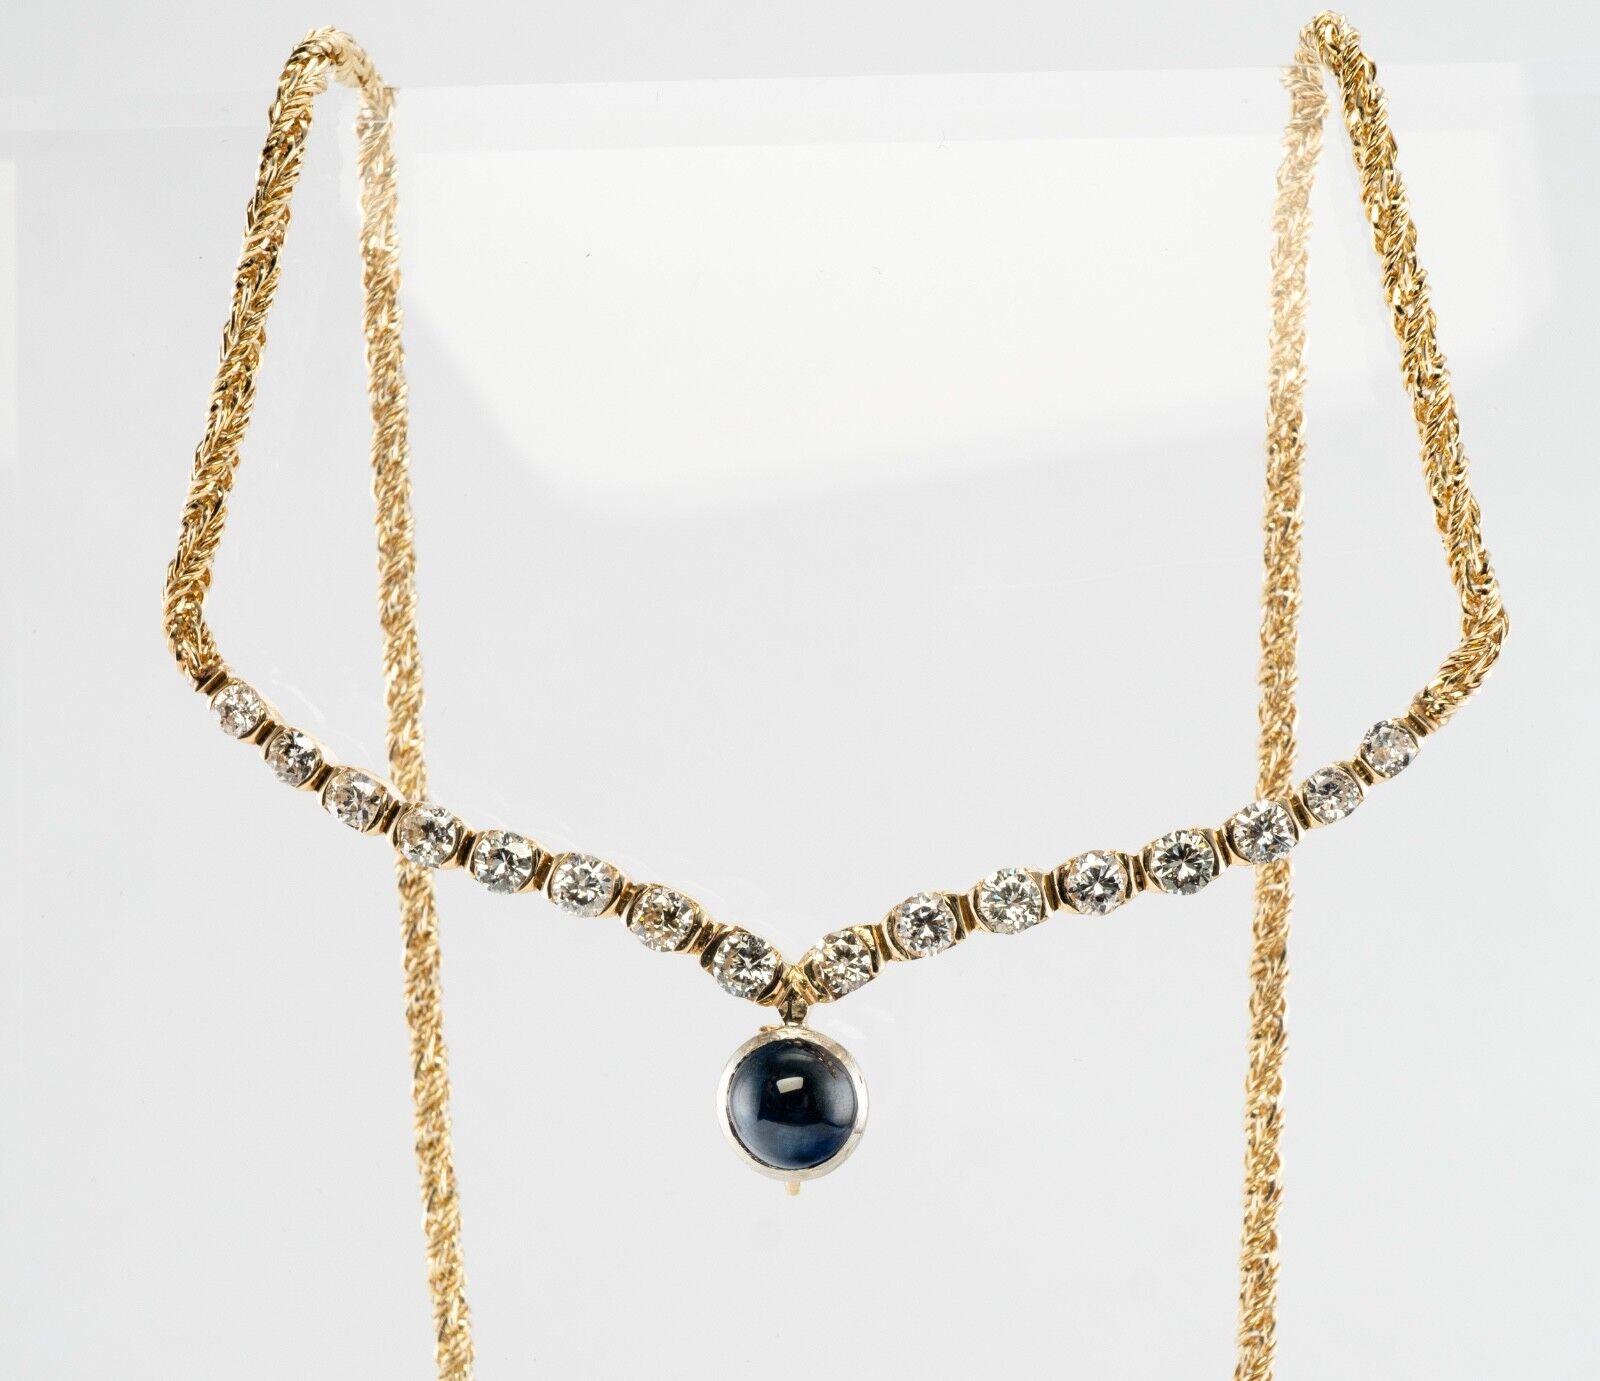 Diamond Sapphire Necklace 14K Gold by Grosse Vintage

This tremendous Vintage necklace, Sapphire necklace, Diamond necklace is made by Grosse company, Germany. This solid 14K Yellow Gold necklace holds a natural Earth mined Sapphire cabochon that